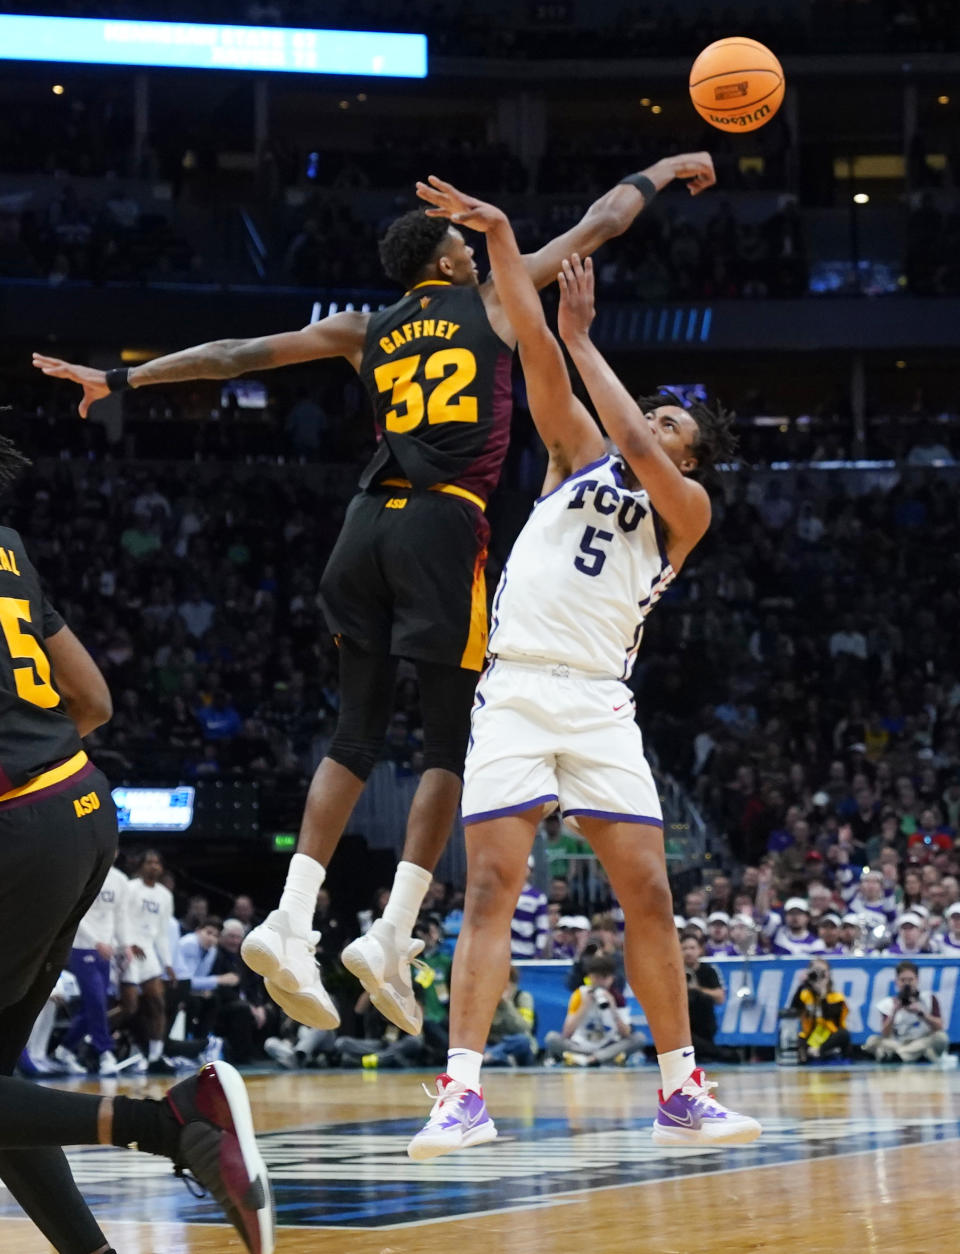 Arizona State forward Alonzo Gaffney, left, blocks a shot by TCU forward Chuck O'Bannon Jr. (5) in the first half of a first-round college basketball game in the men's NCAA Tournament, Friday, March 17, 2023, in Denver. (AP Photo/John Leyba)